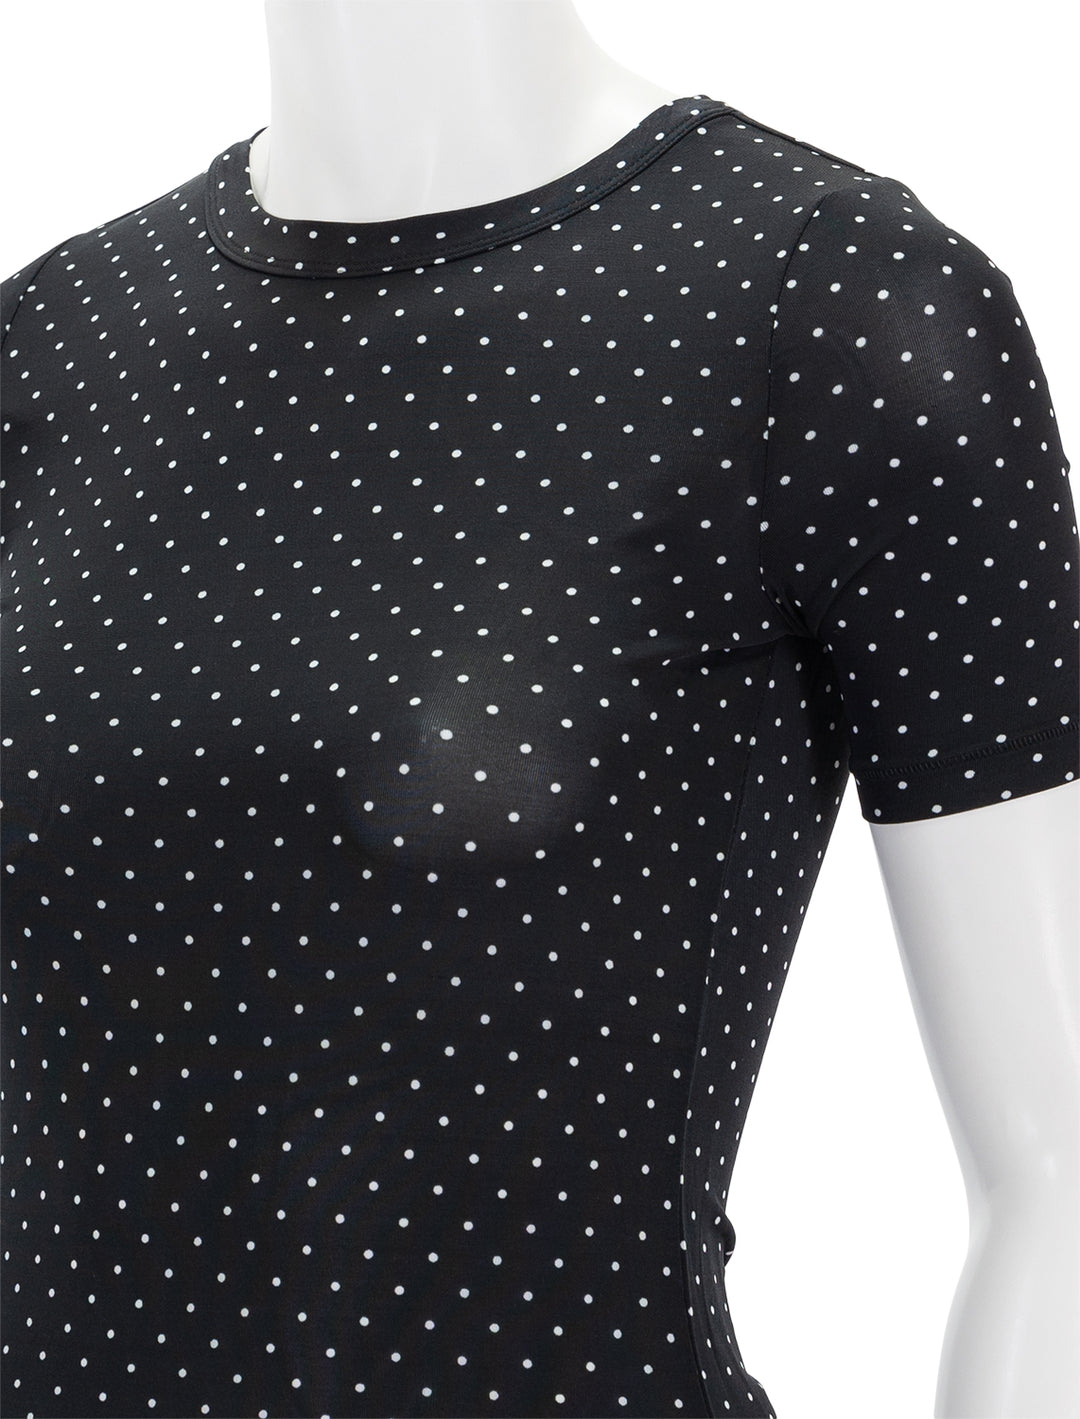 Close-up view of Rag & Bone's polka dot sabeen top in black.